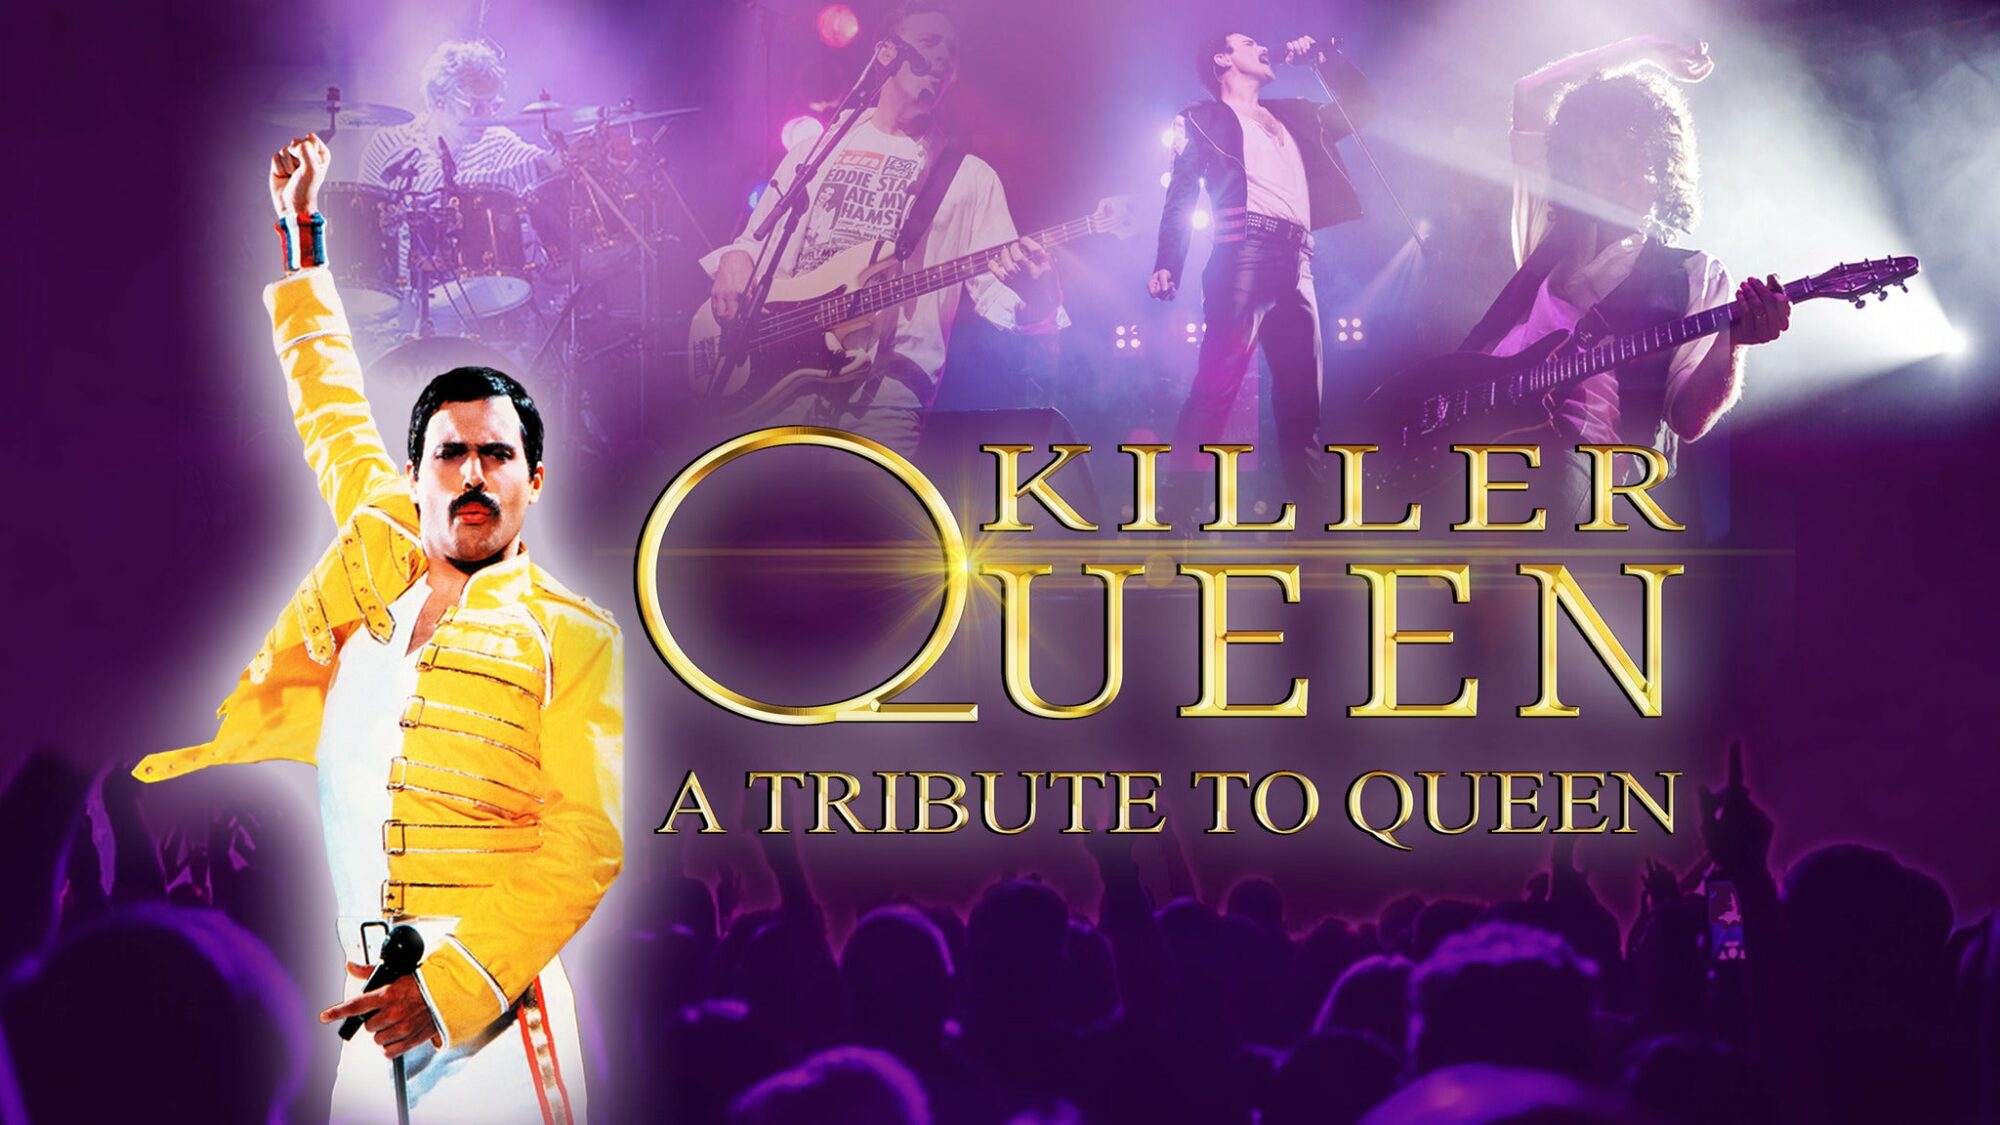 Image name Killer Queen at Sheffield City Hall Oval Hall Sheffield the 9 image from the post Killer Queen at Sheffield City Hall Oval Hall, Sheffield in Yorkshire.com.